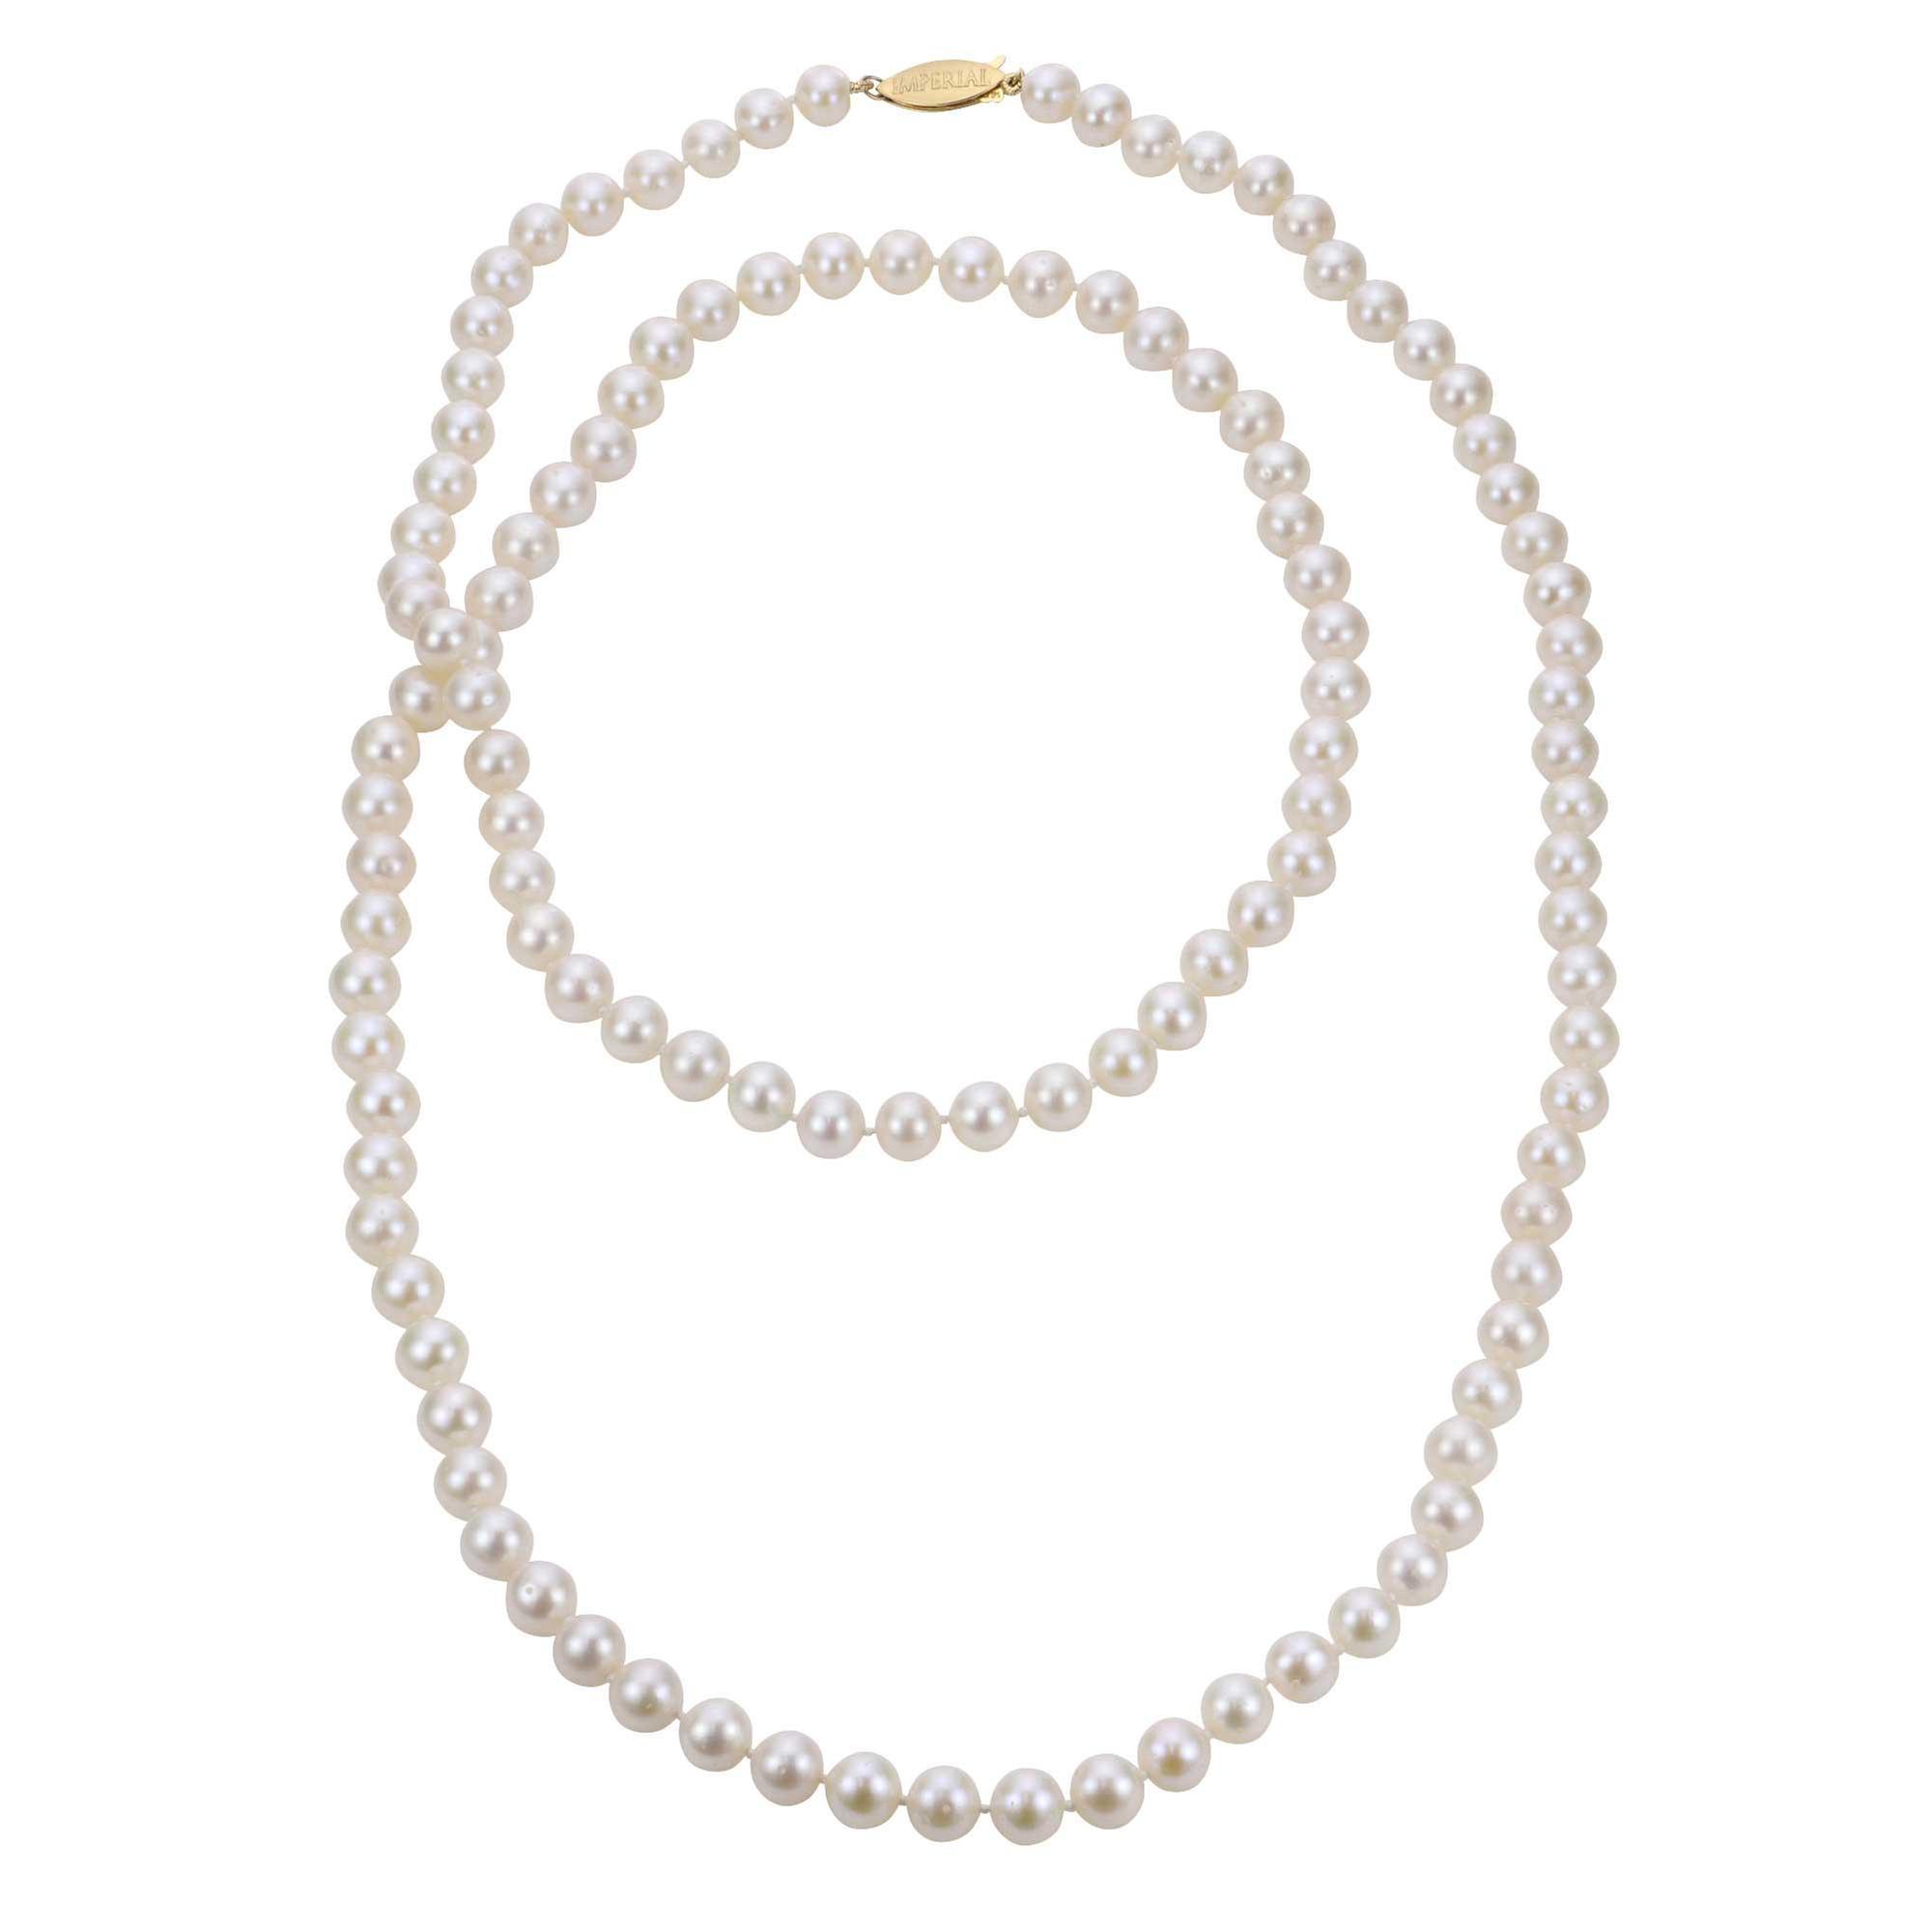 Single Strand White Freshwater Pearl Necklace 6mm 20 